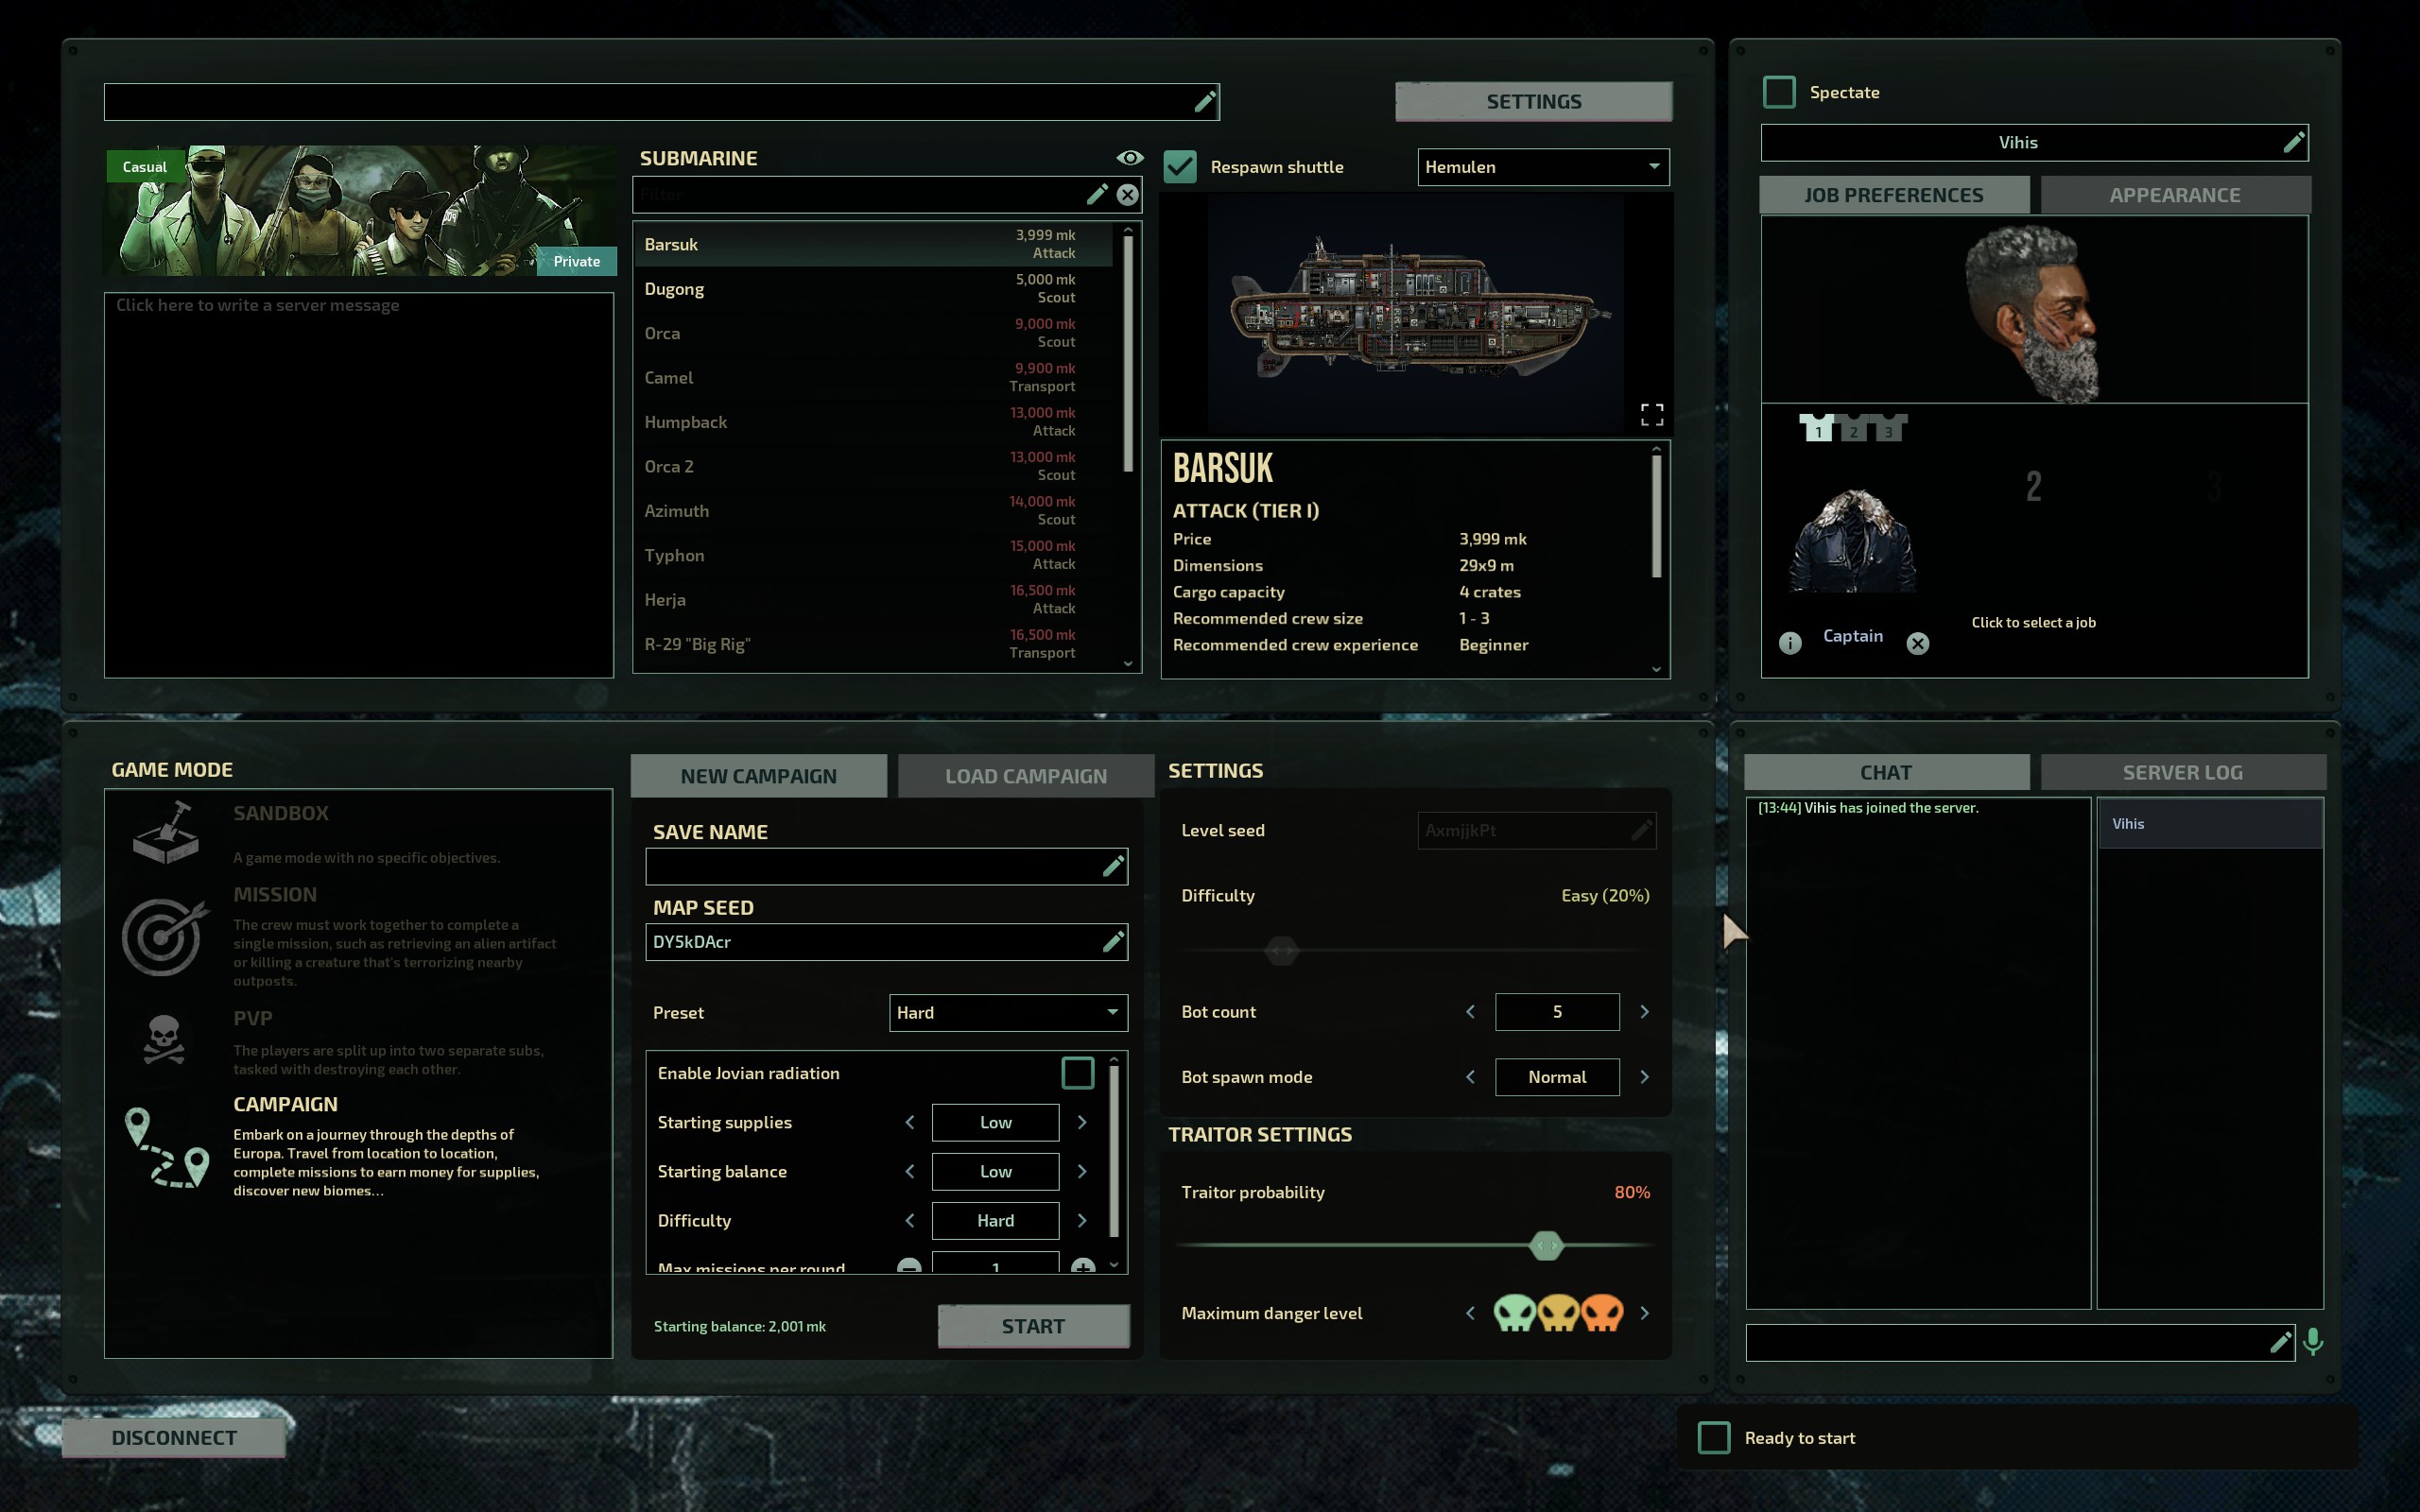 Barotrauma traitor mode enabled in campaign example